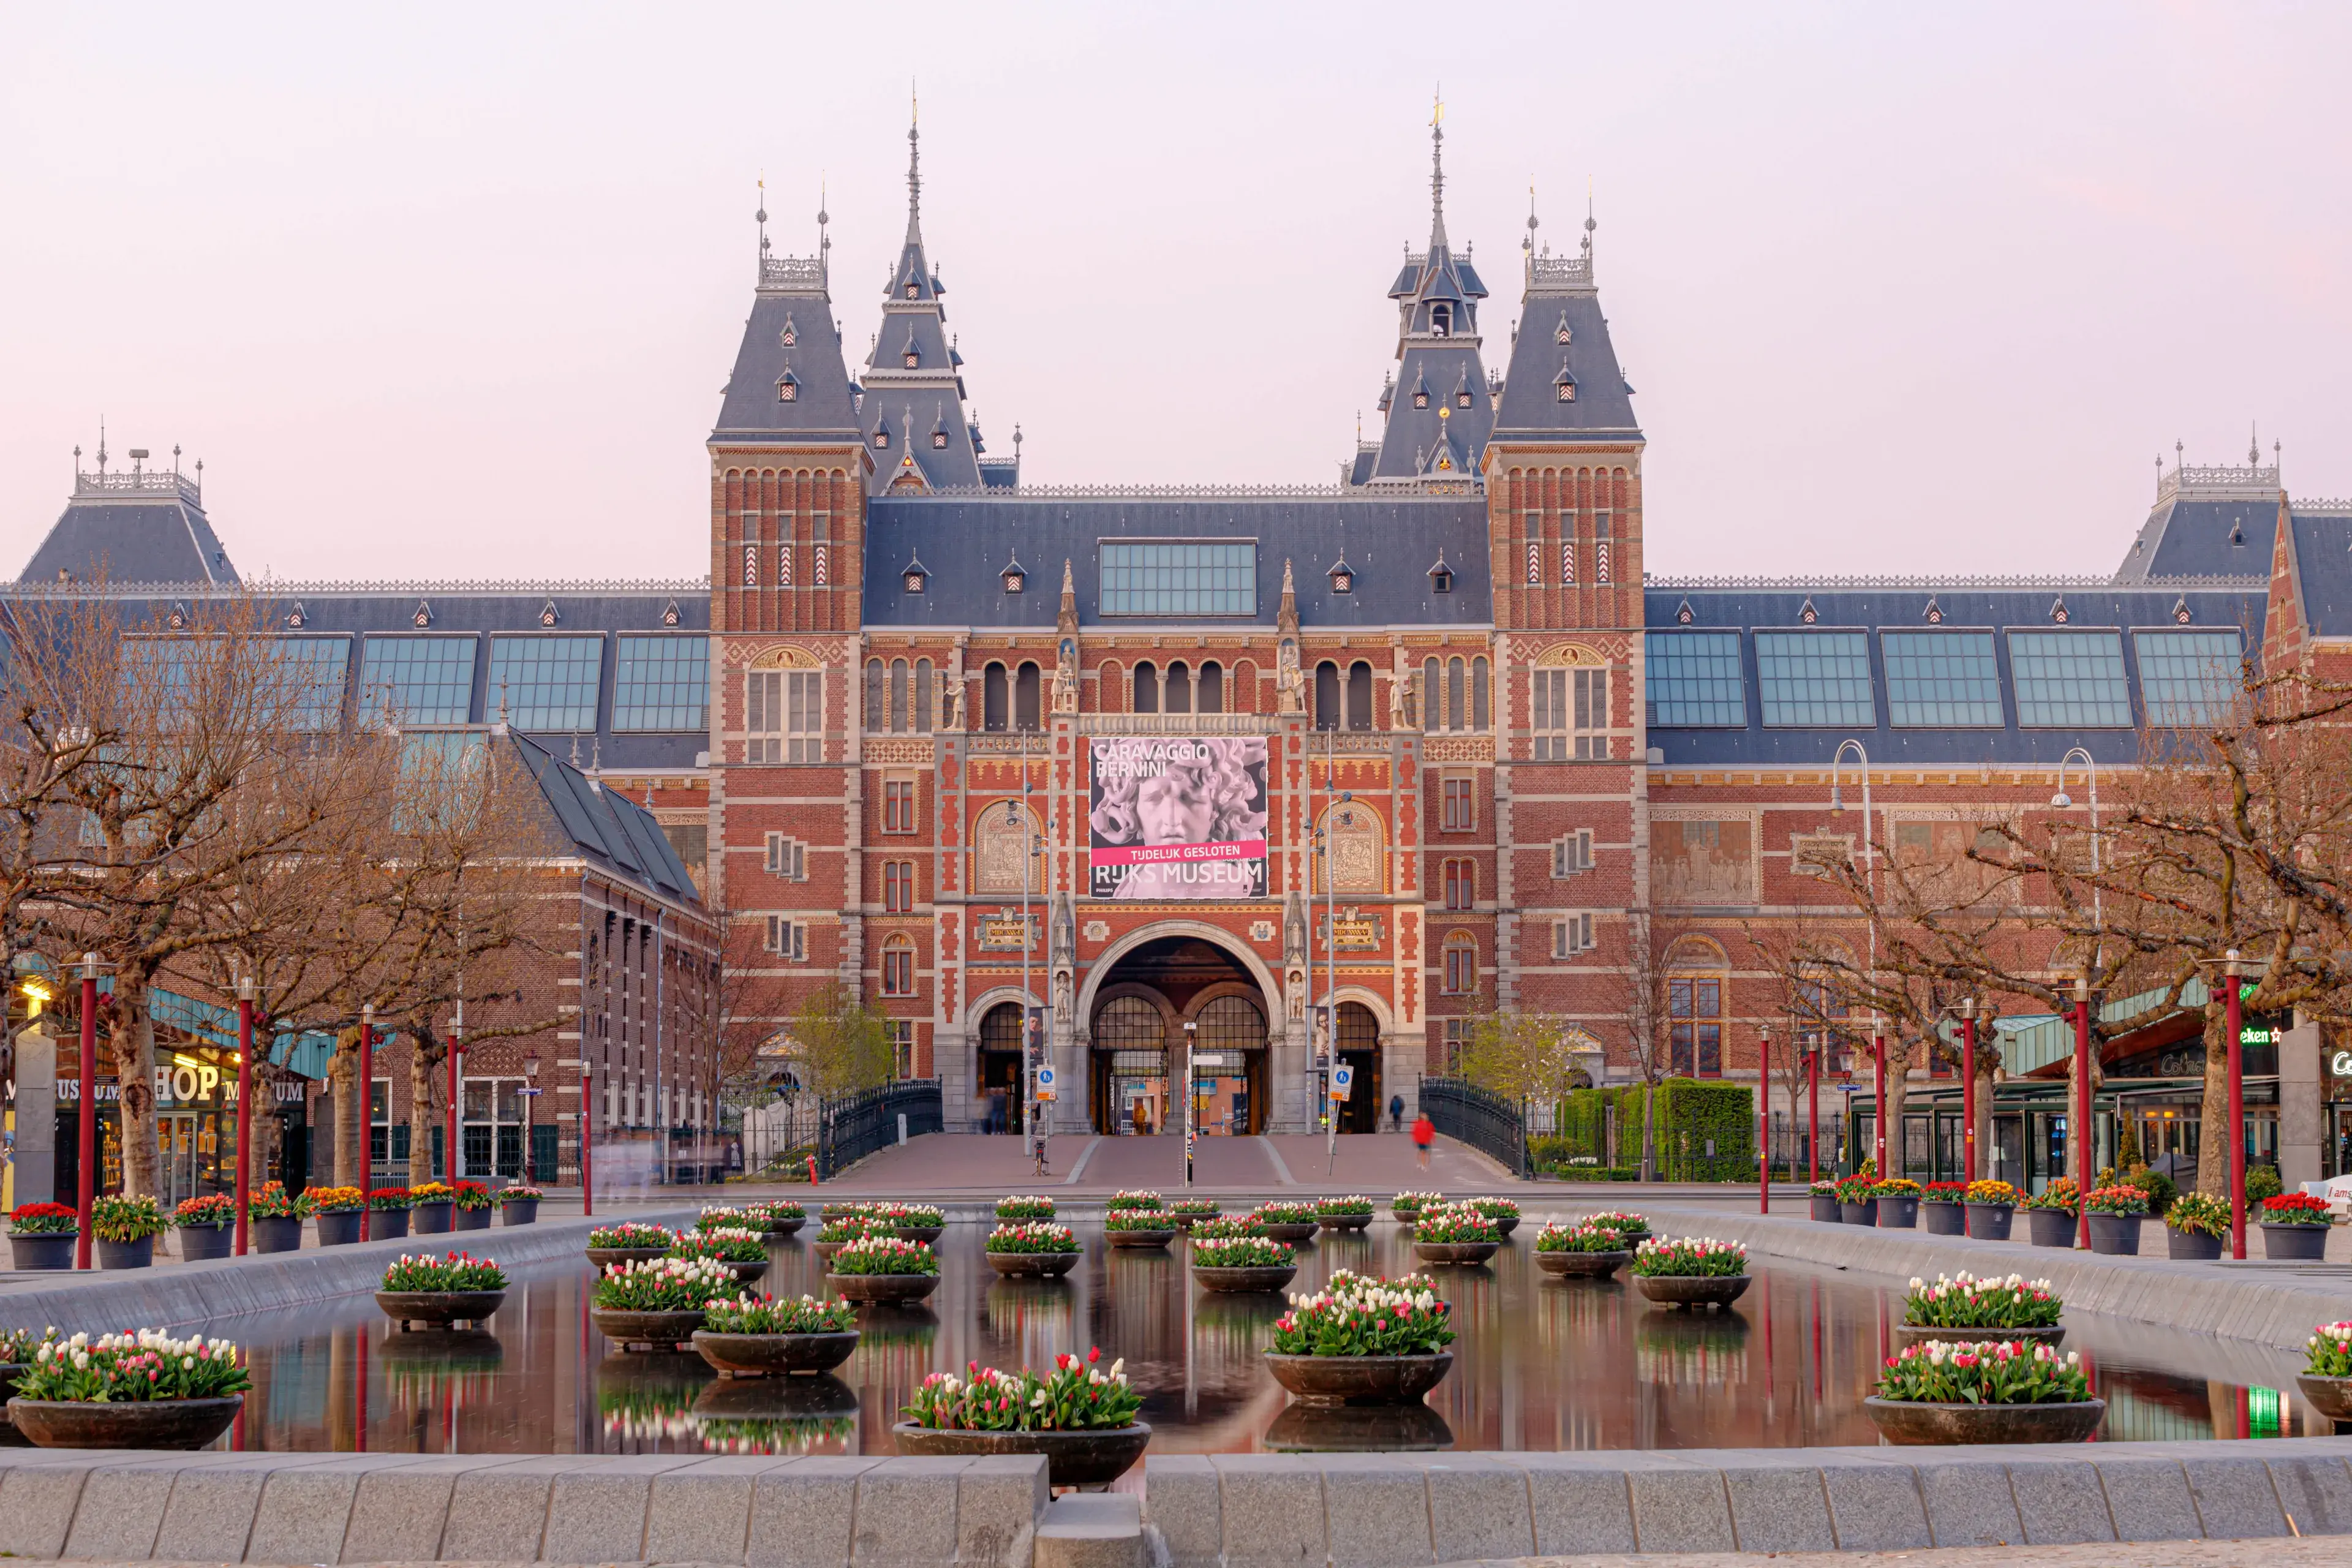 Top 5 Museums in Amsterdam